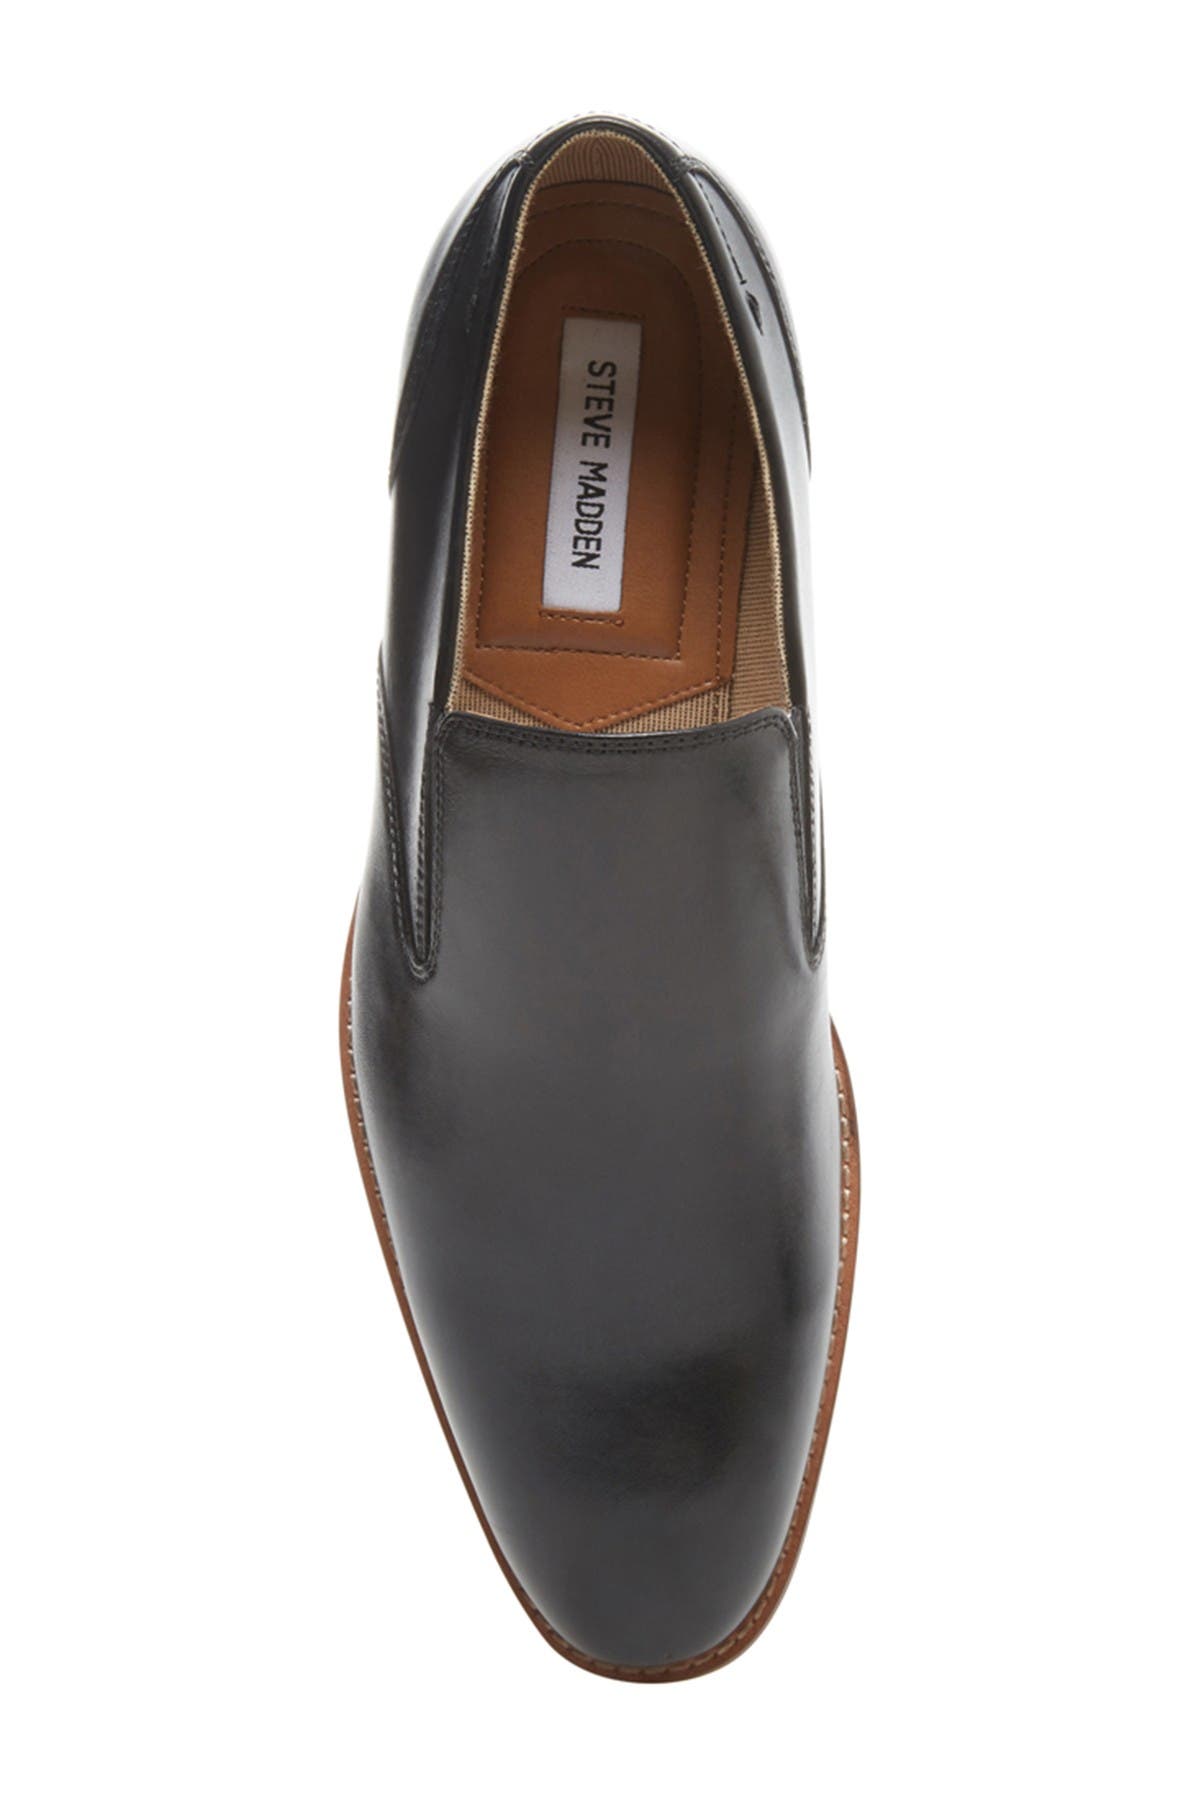 steve madden leather loafers